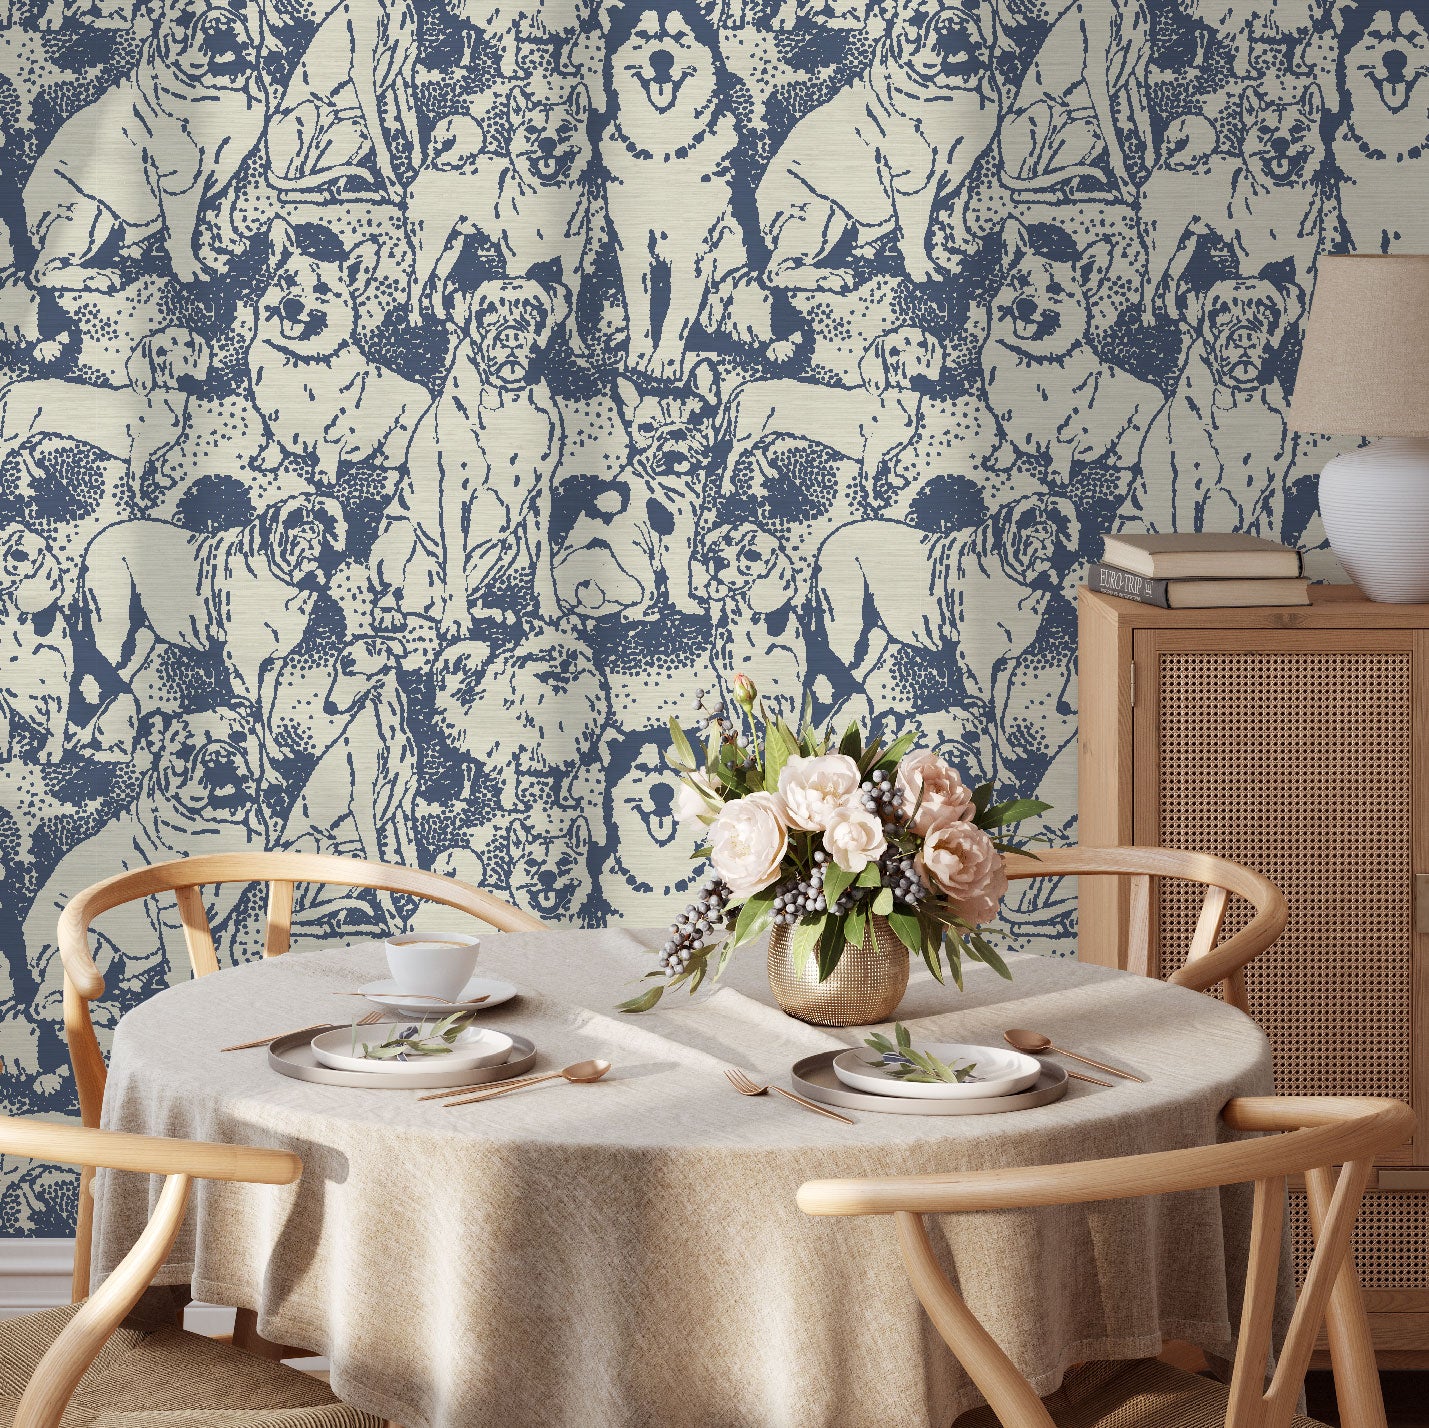 dog printed grasscloth wallpaper puppy huskie, bulldogs, mastiff, wiener, beagles, yorkie Natural Textured Eco-Friendly Non-toxic High-quality Sustainable Interior Design Bold Custom kids mudroom veterinary grooming animal pink olive cream white off-white navy slate grey neutral dining room